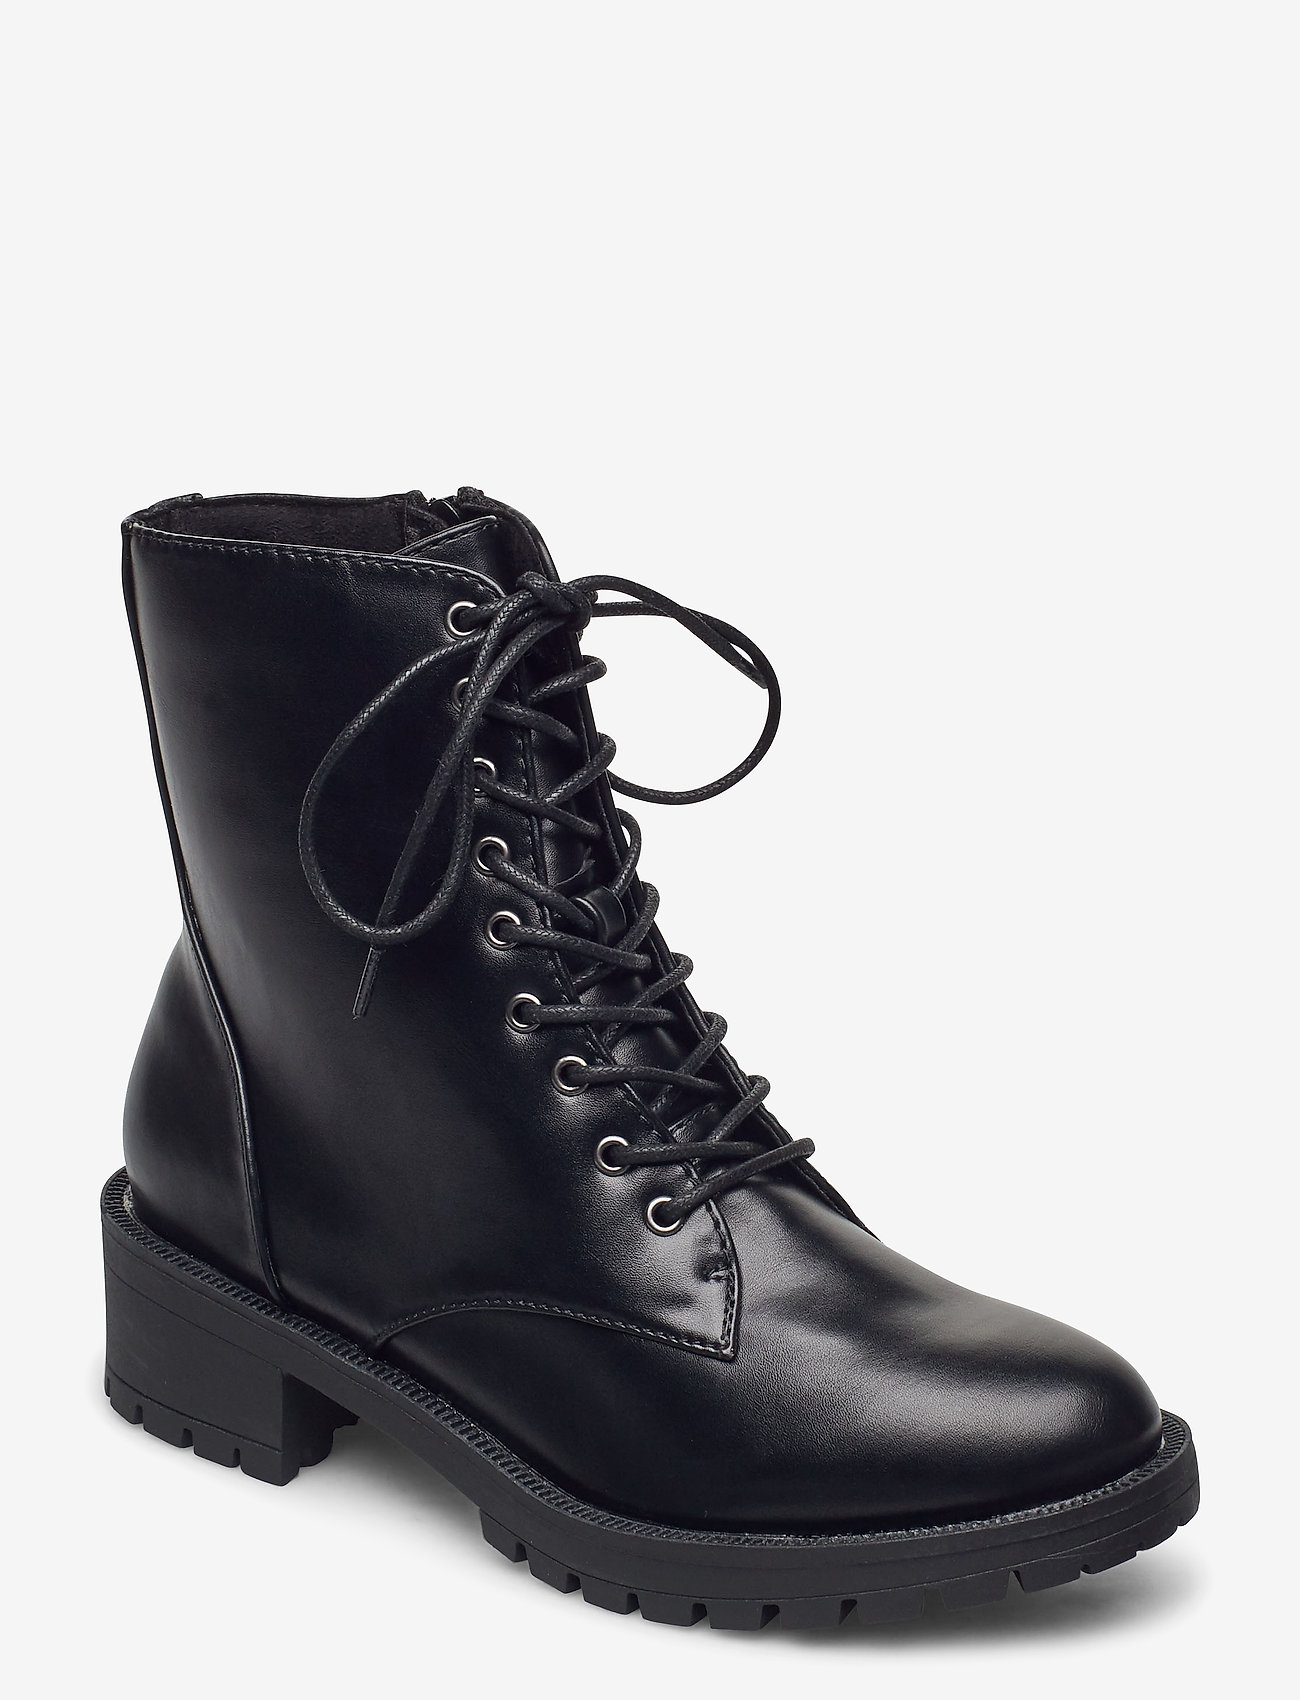 Biaclaire Laced-up Boot (Black) (52.49 